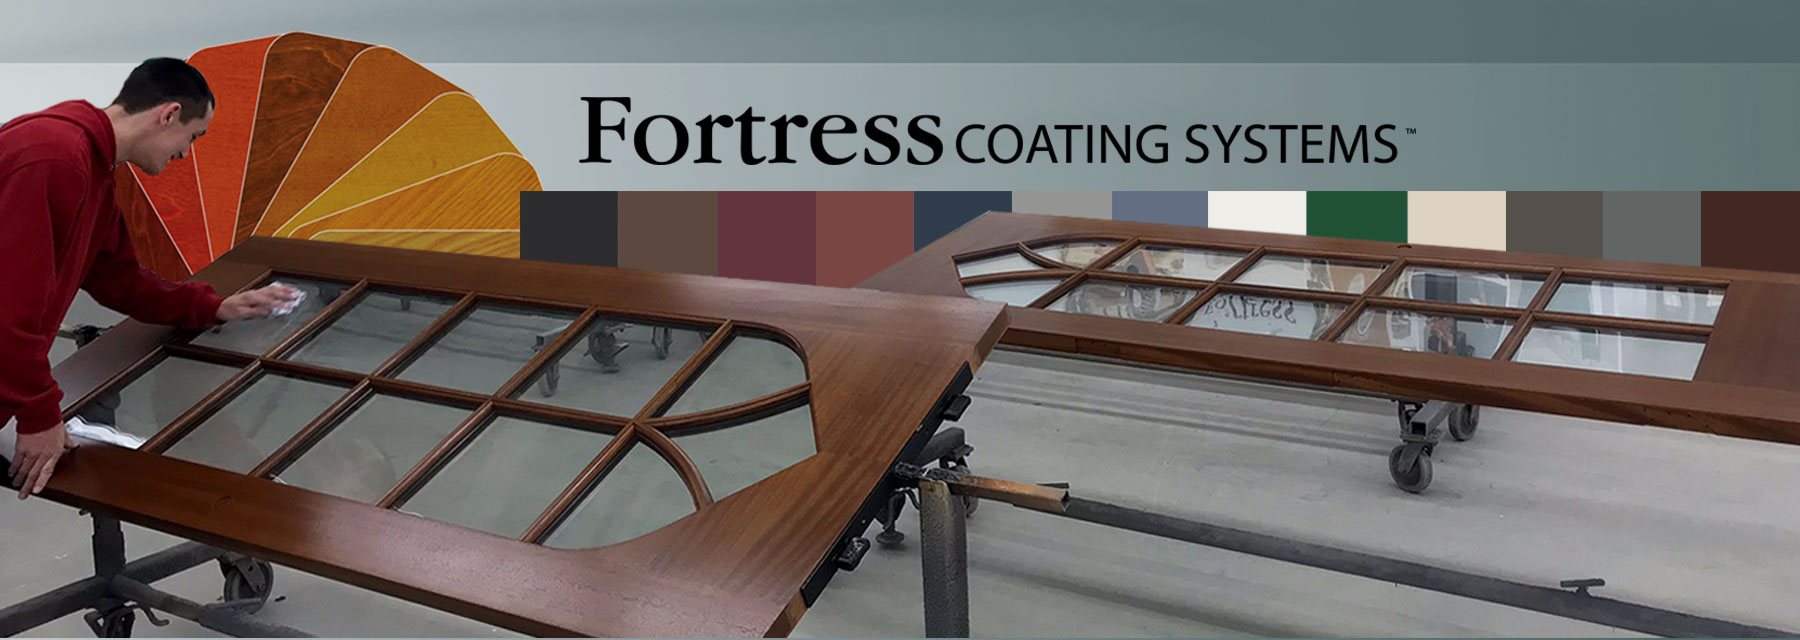 Fortress Coating Systems